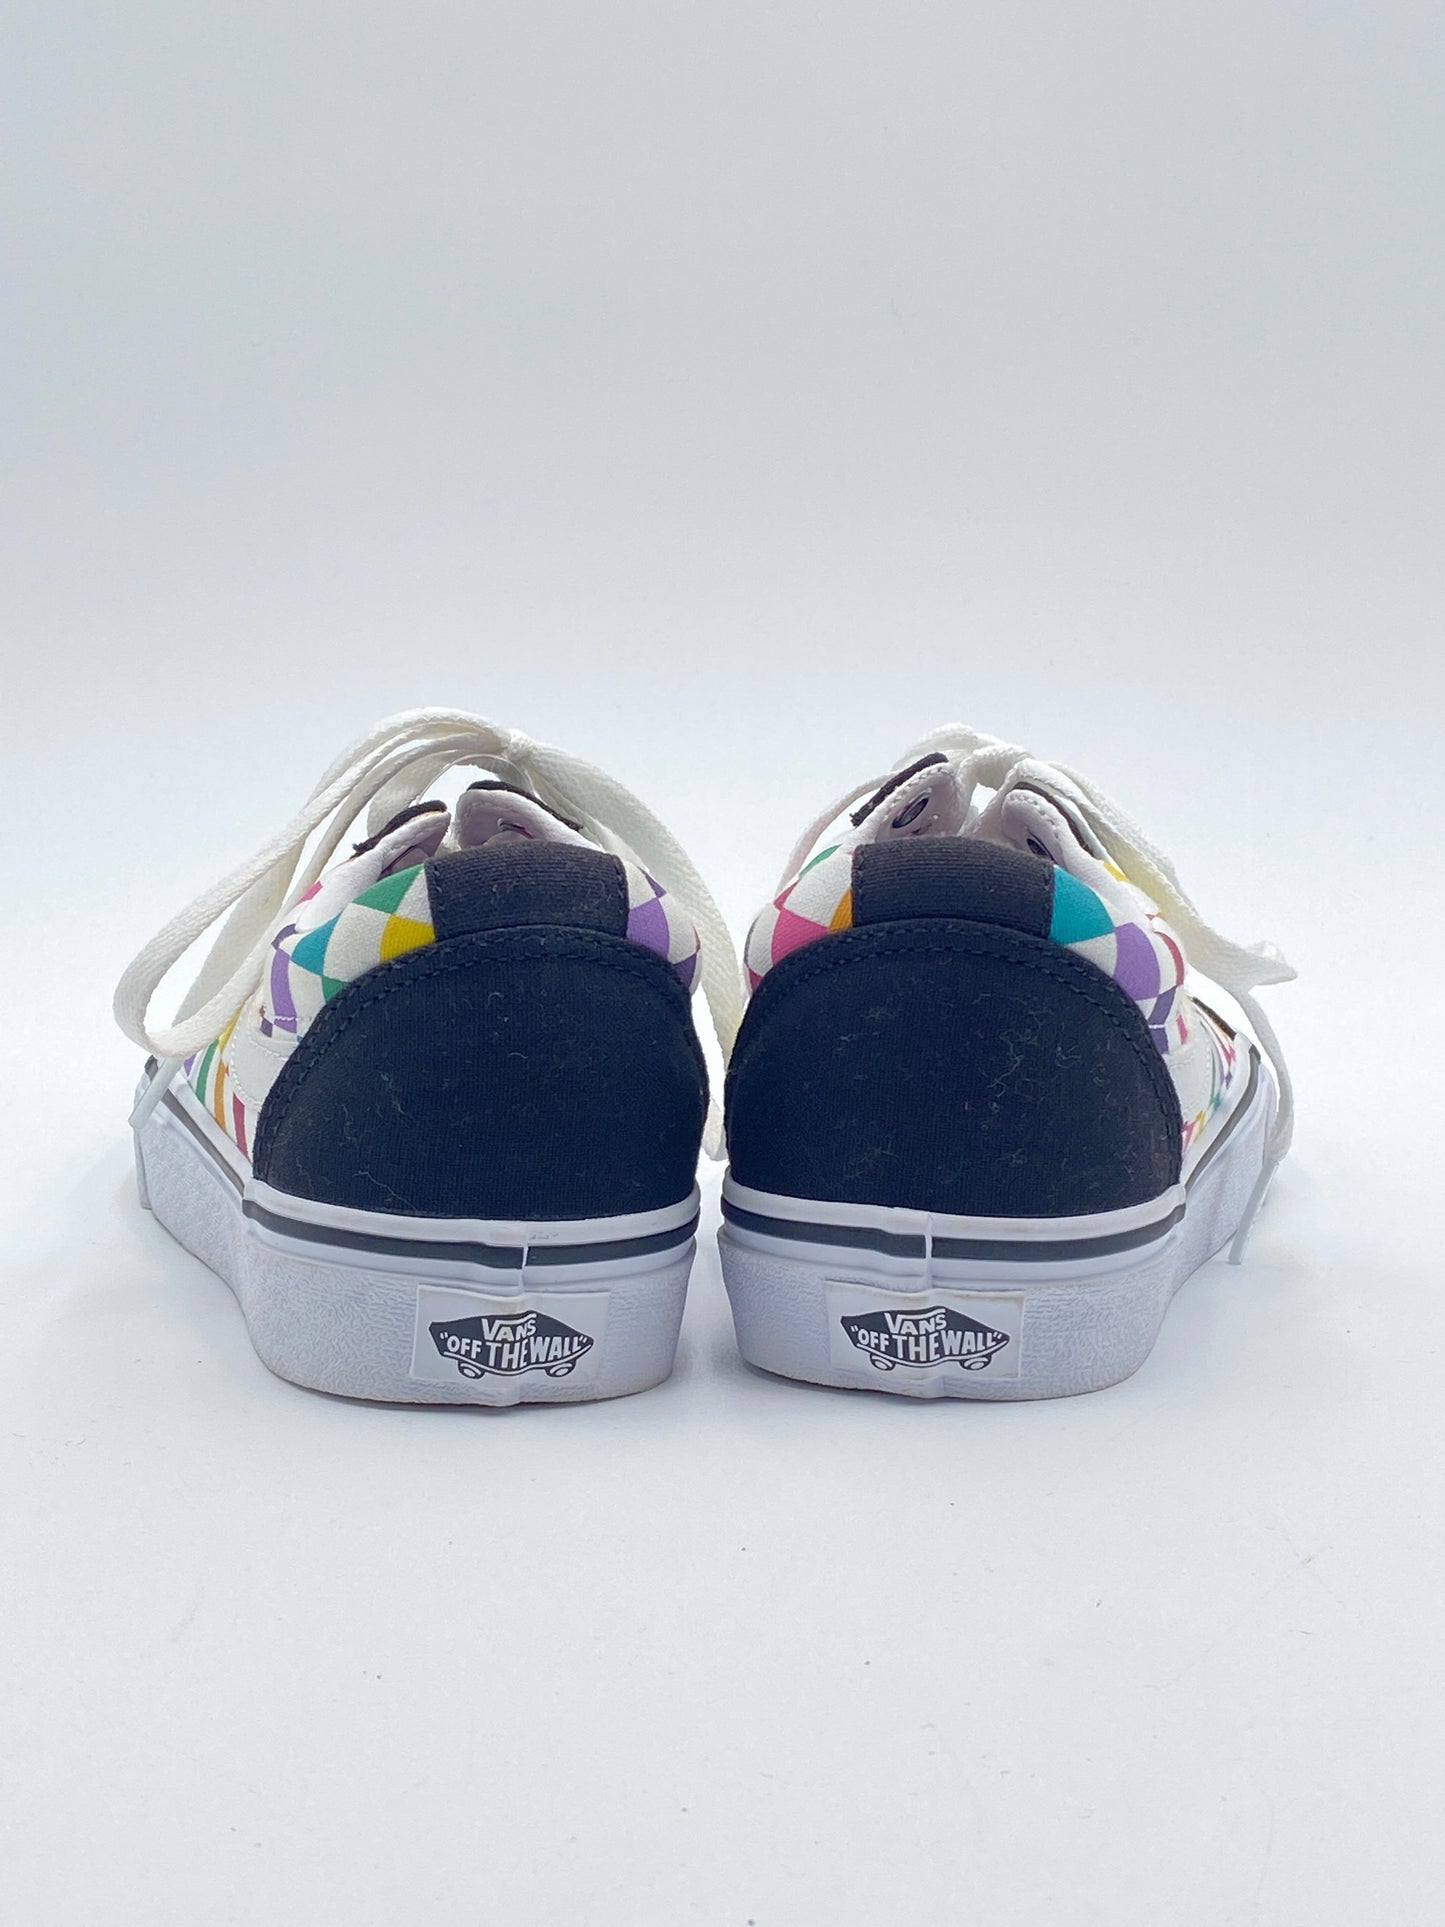 Multi-colored Shoes Sneakers Vans, Size 6.5